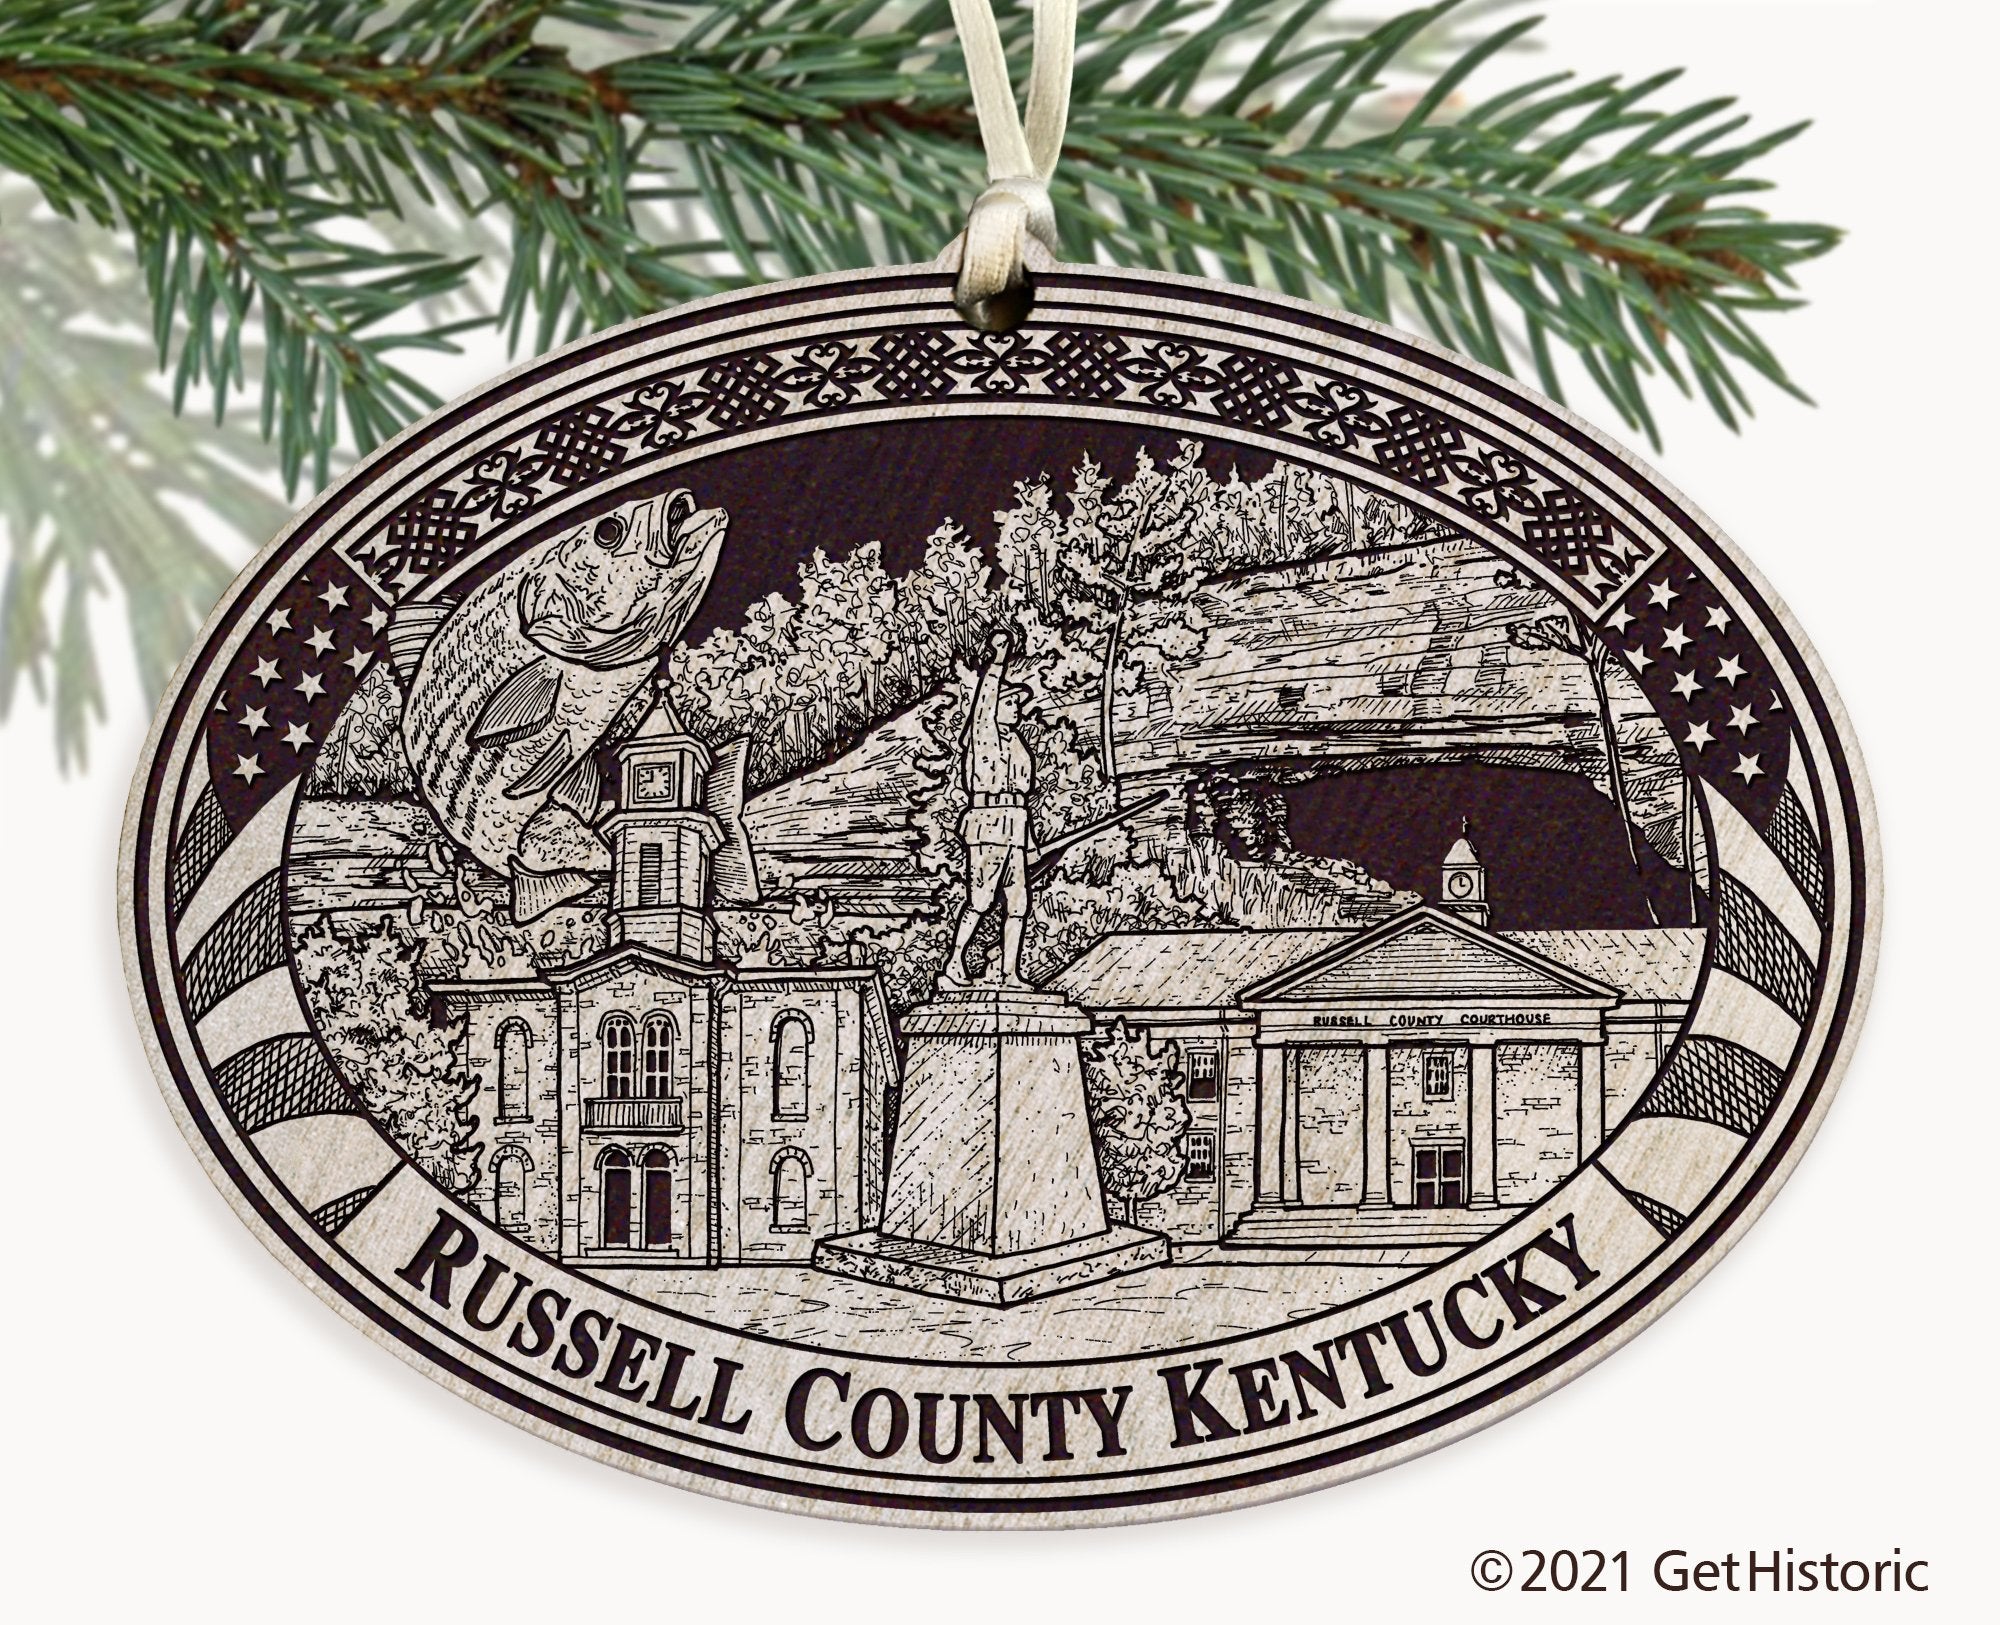 Russell County Kentucky Engraved Ornament